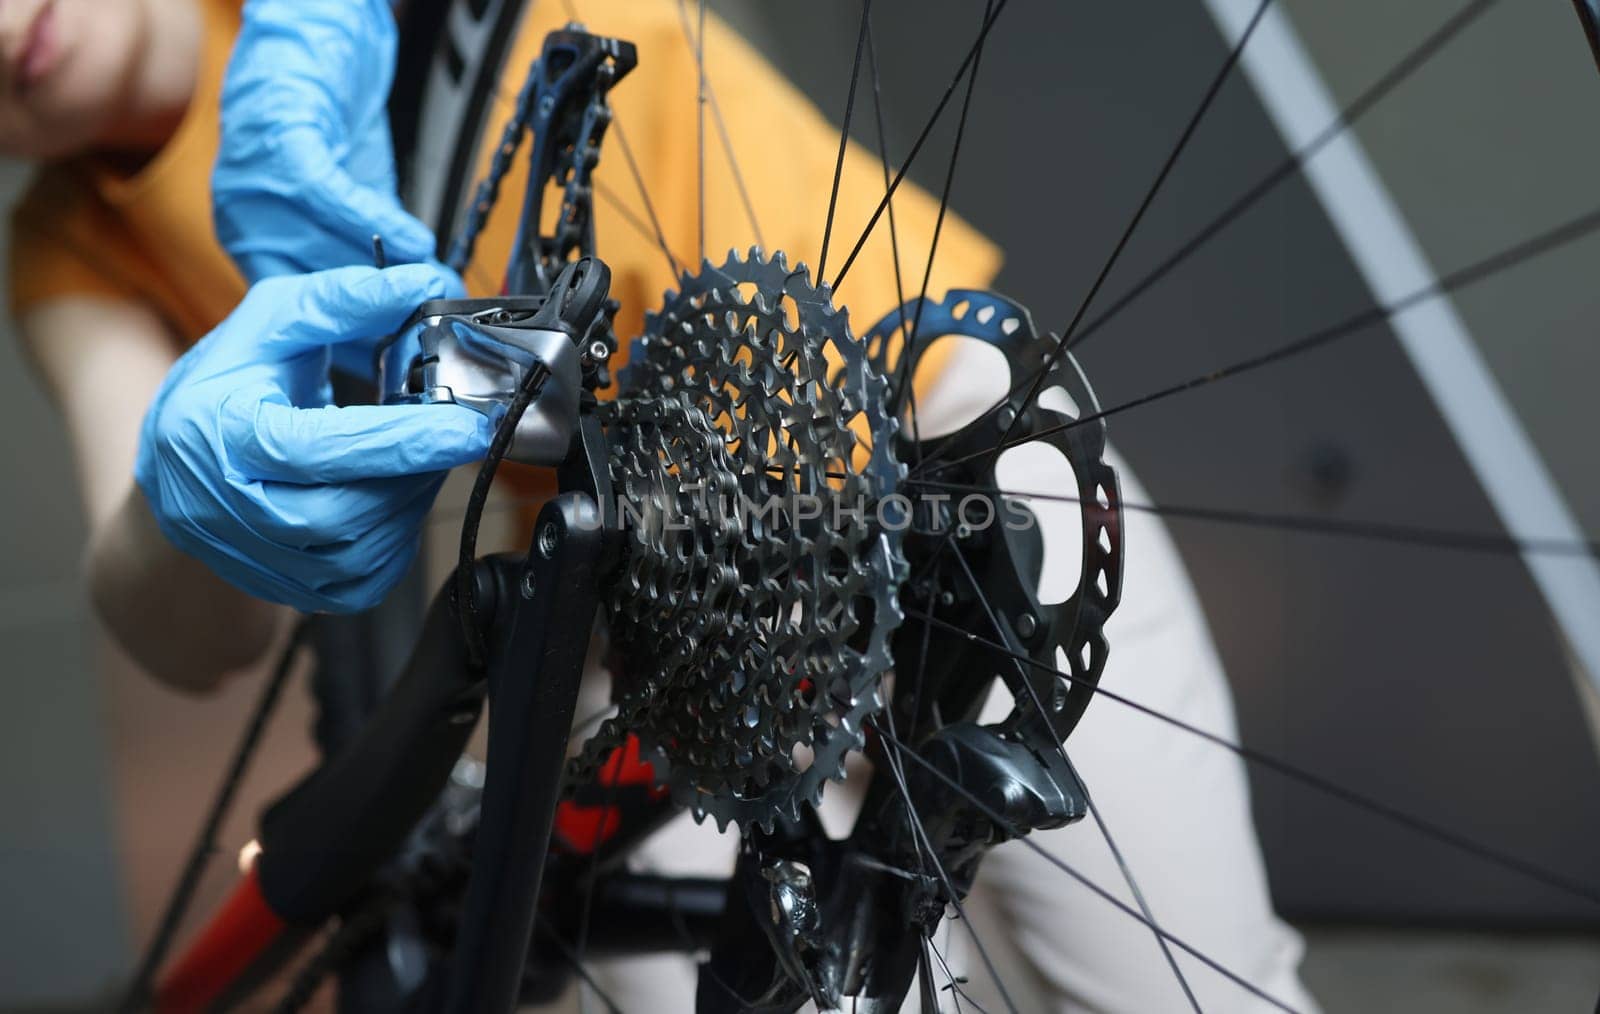 Craftsman in rubber protective gloves repairing bicycle closeup. Bicycle service concept